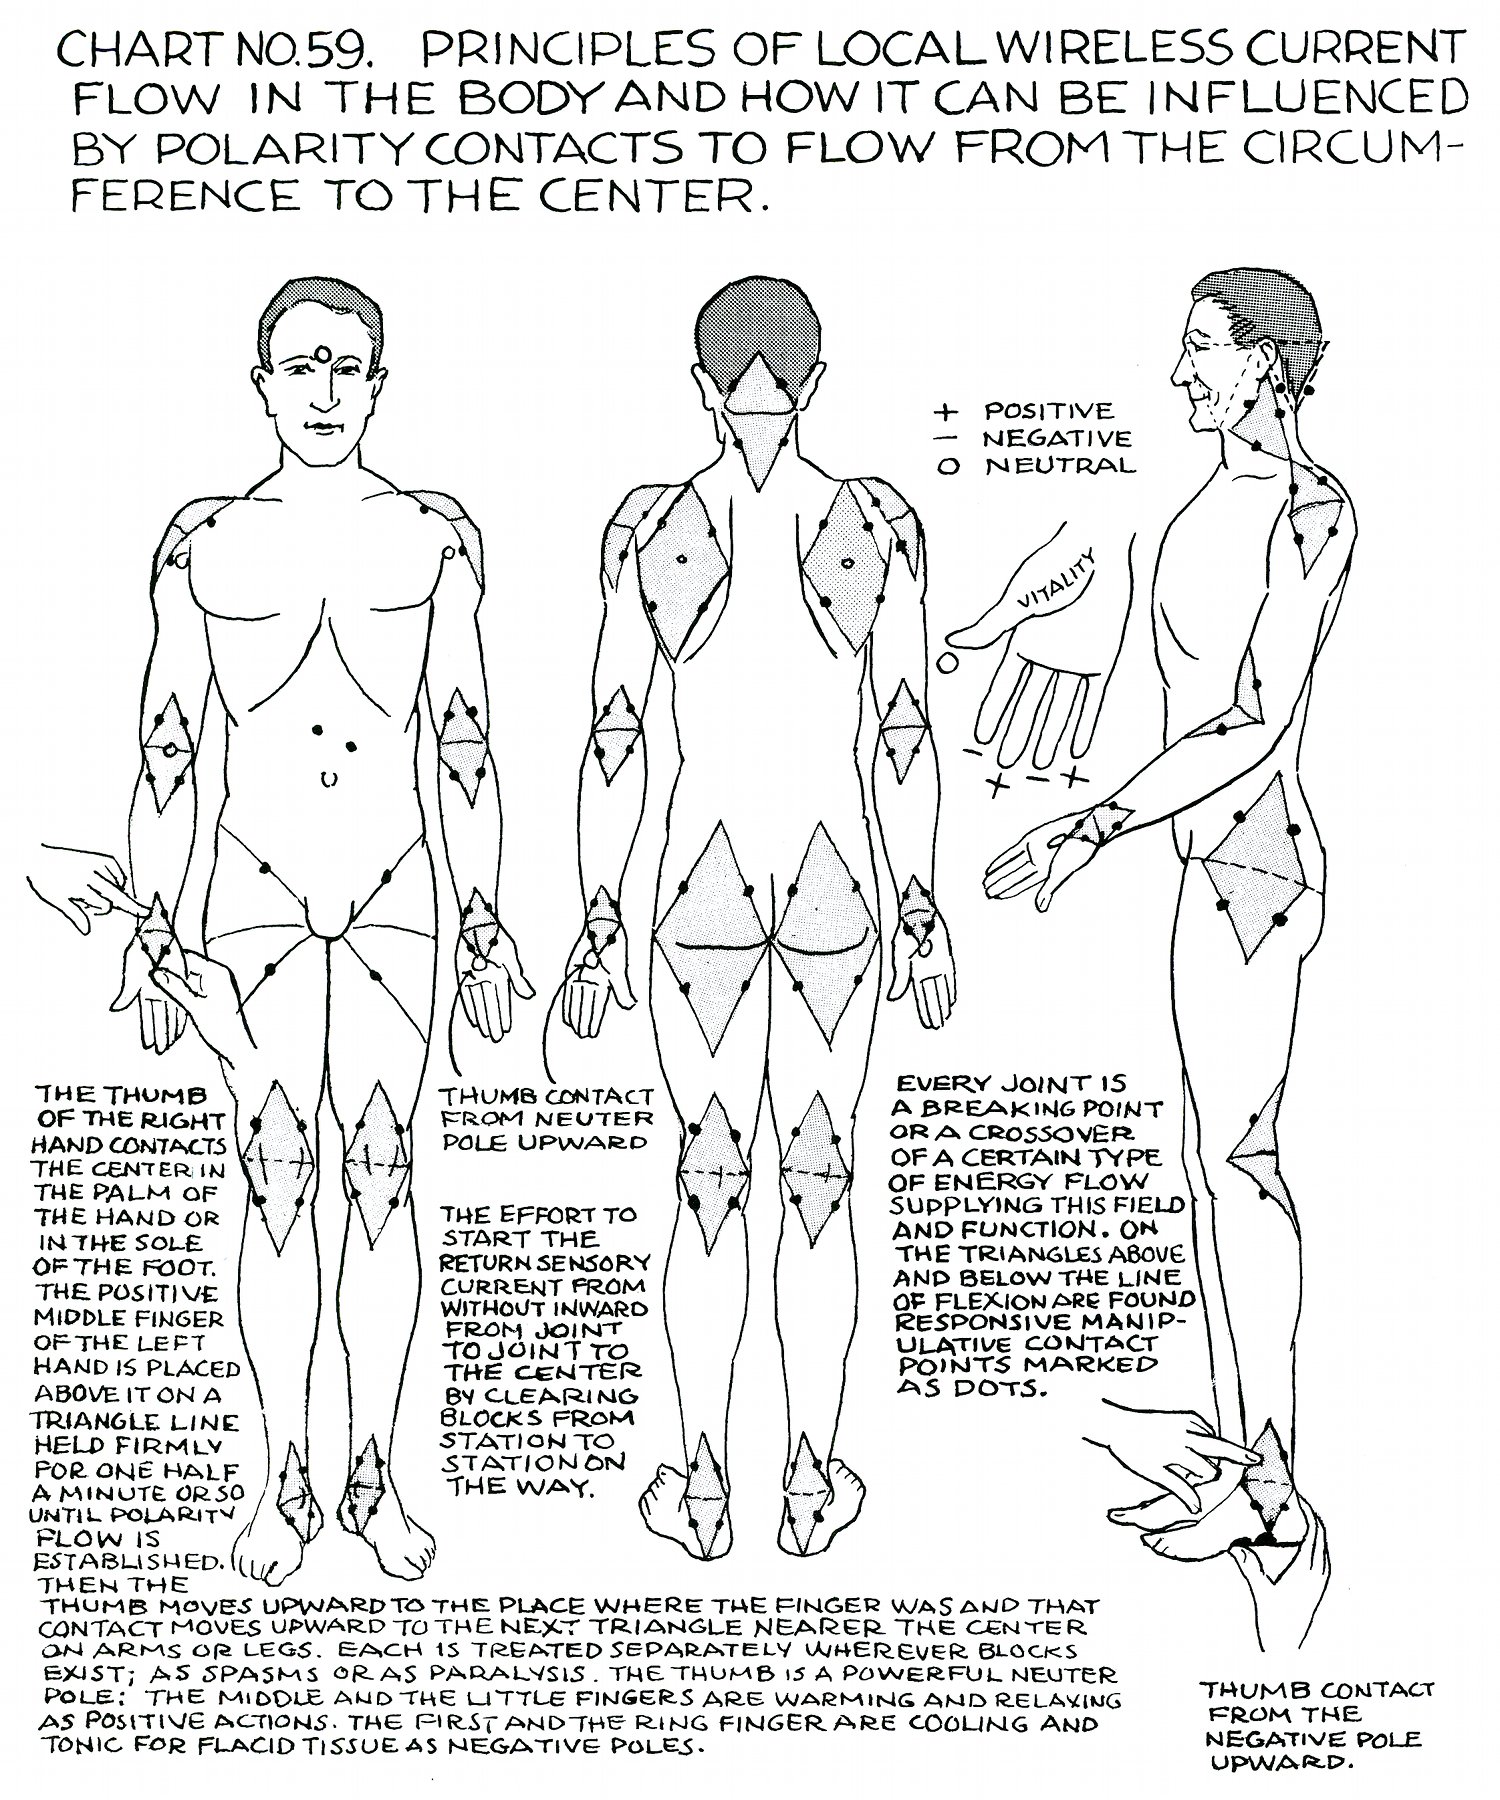 Polarity Therapy Charts